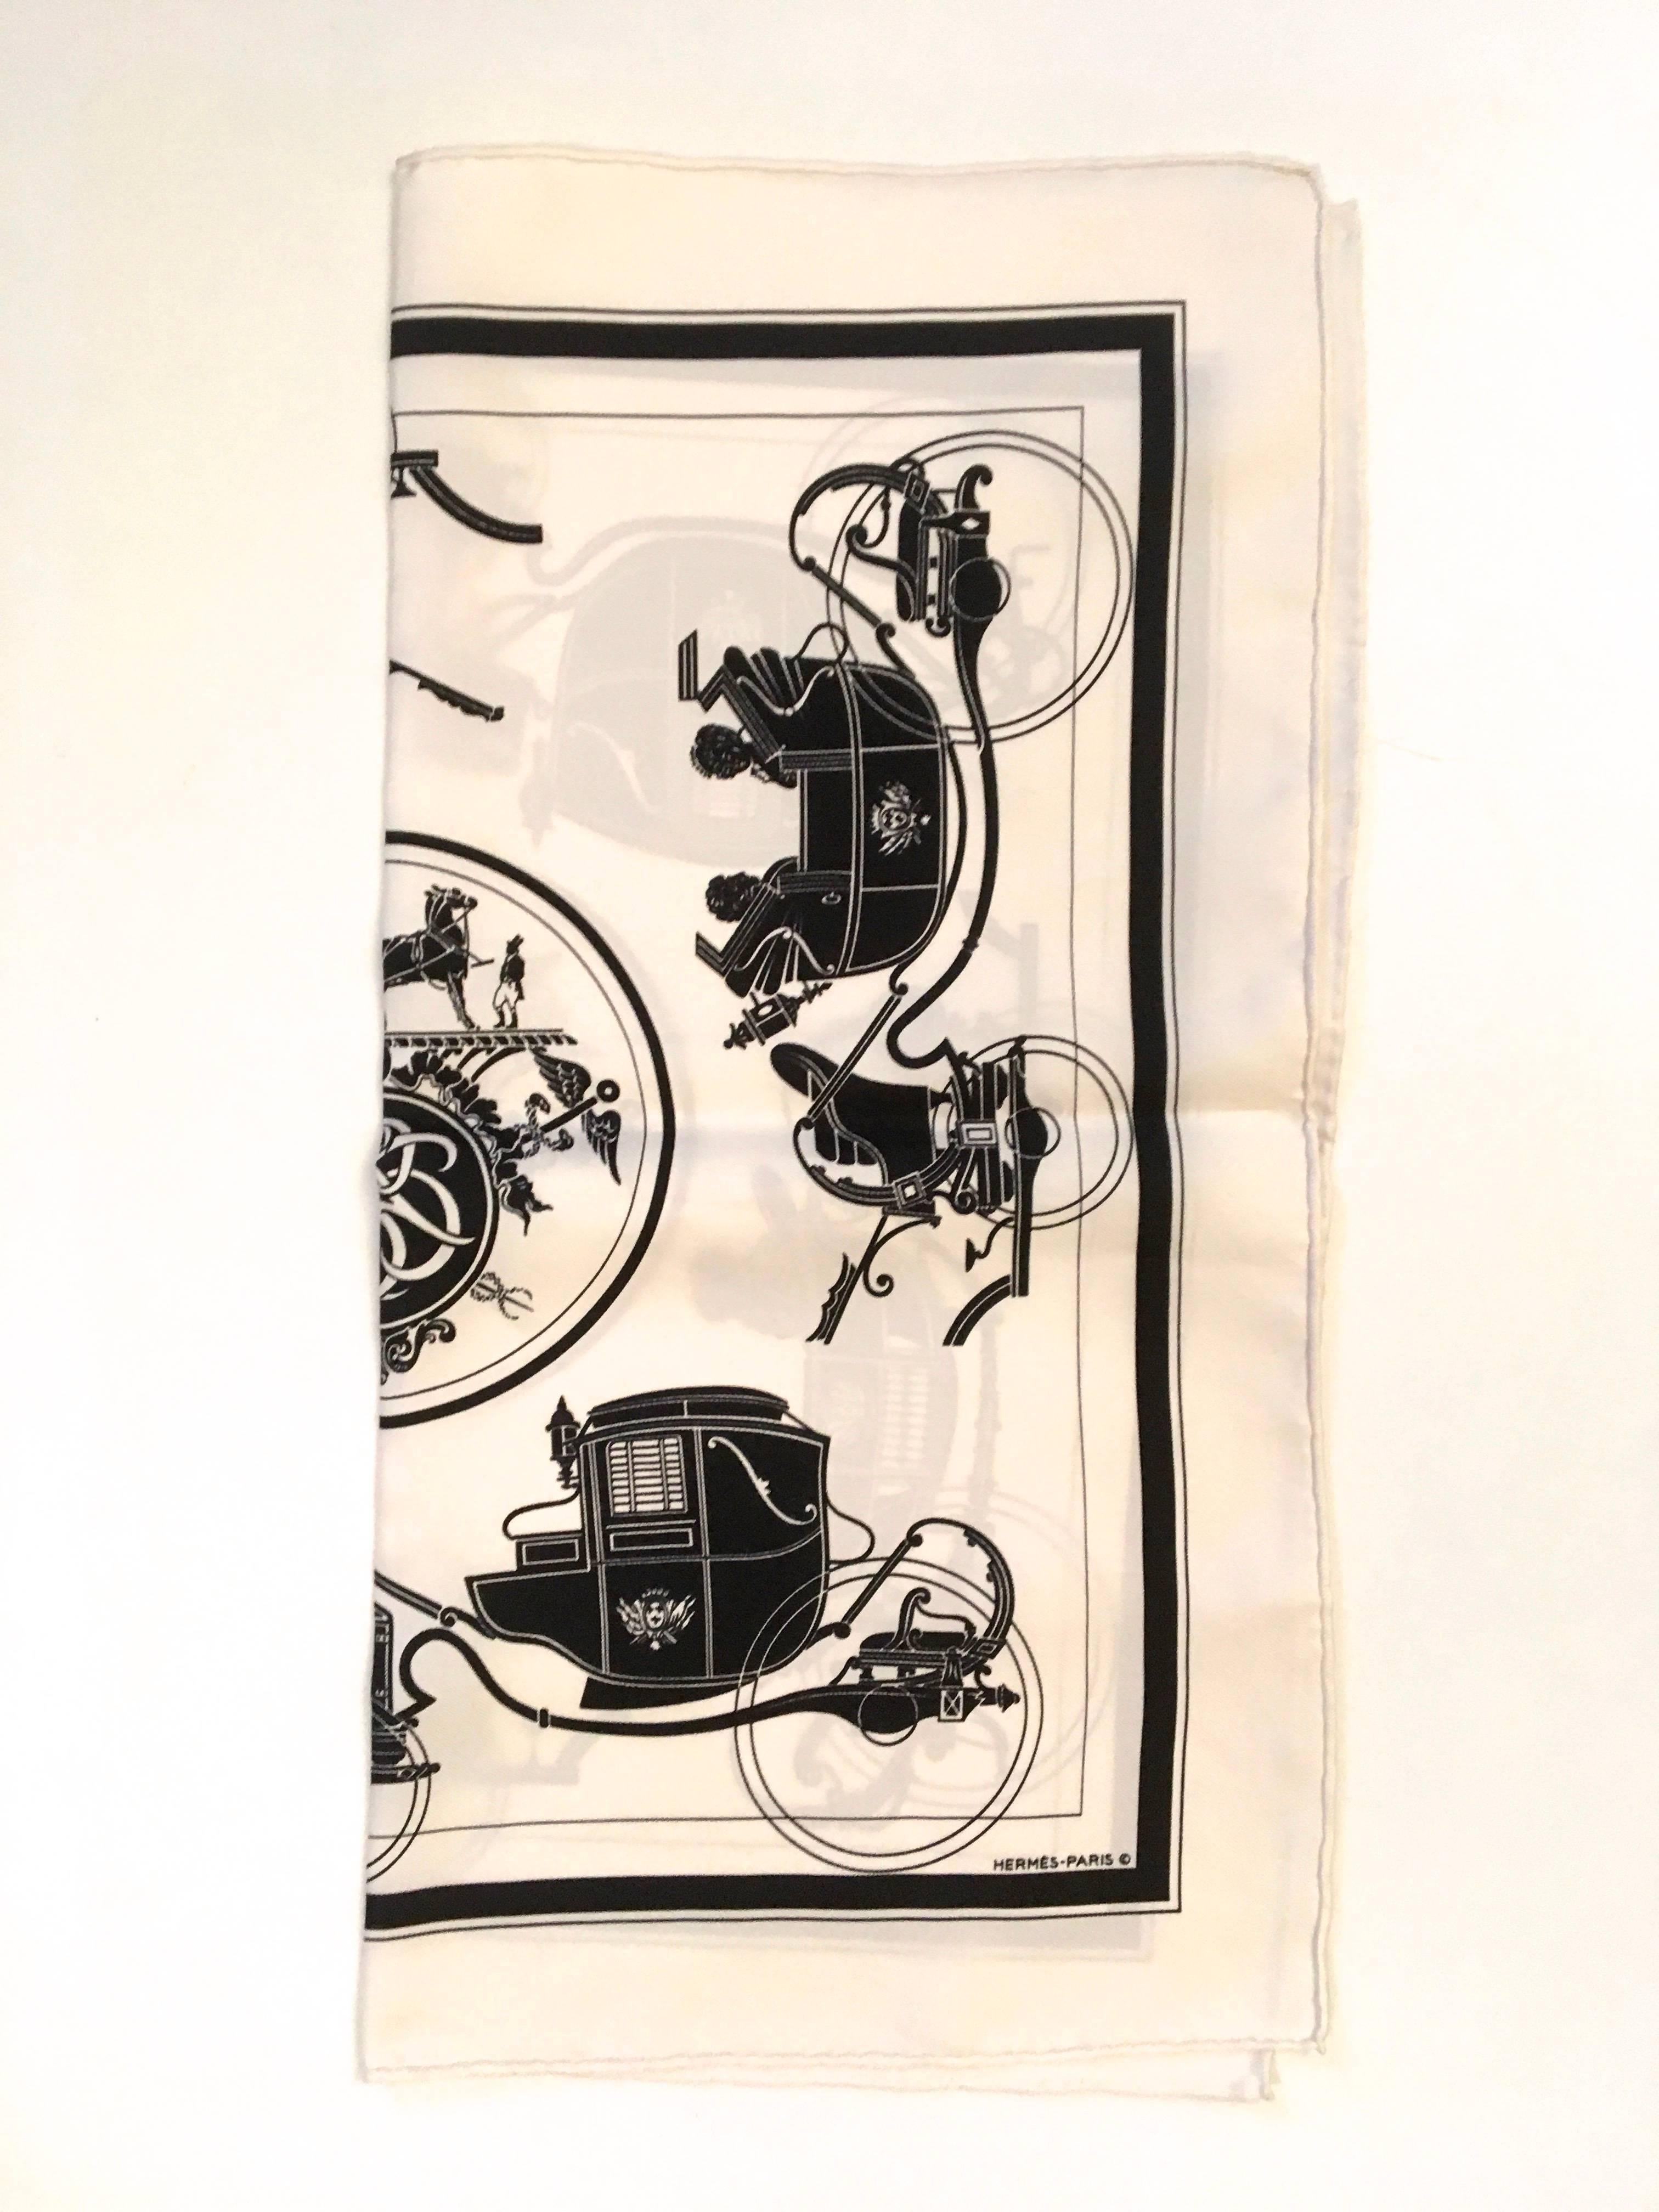 Presented here is a beautiful scarf from Hermes. The scarf measures 16.5 inches by 16.5 inches. The scarf is comprised of shades of white, gray and black. The design is comprised of ornate carriages, one on each side of the scarf. The carriages are